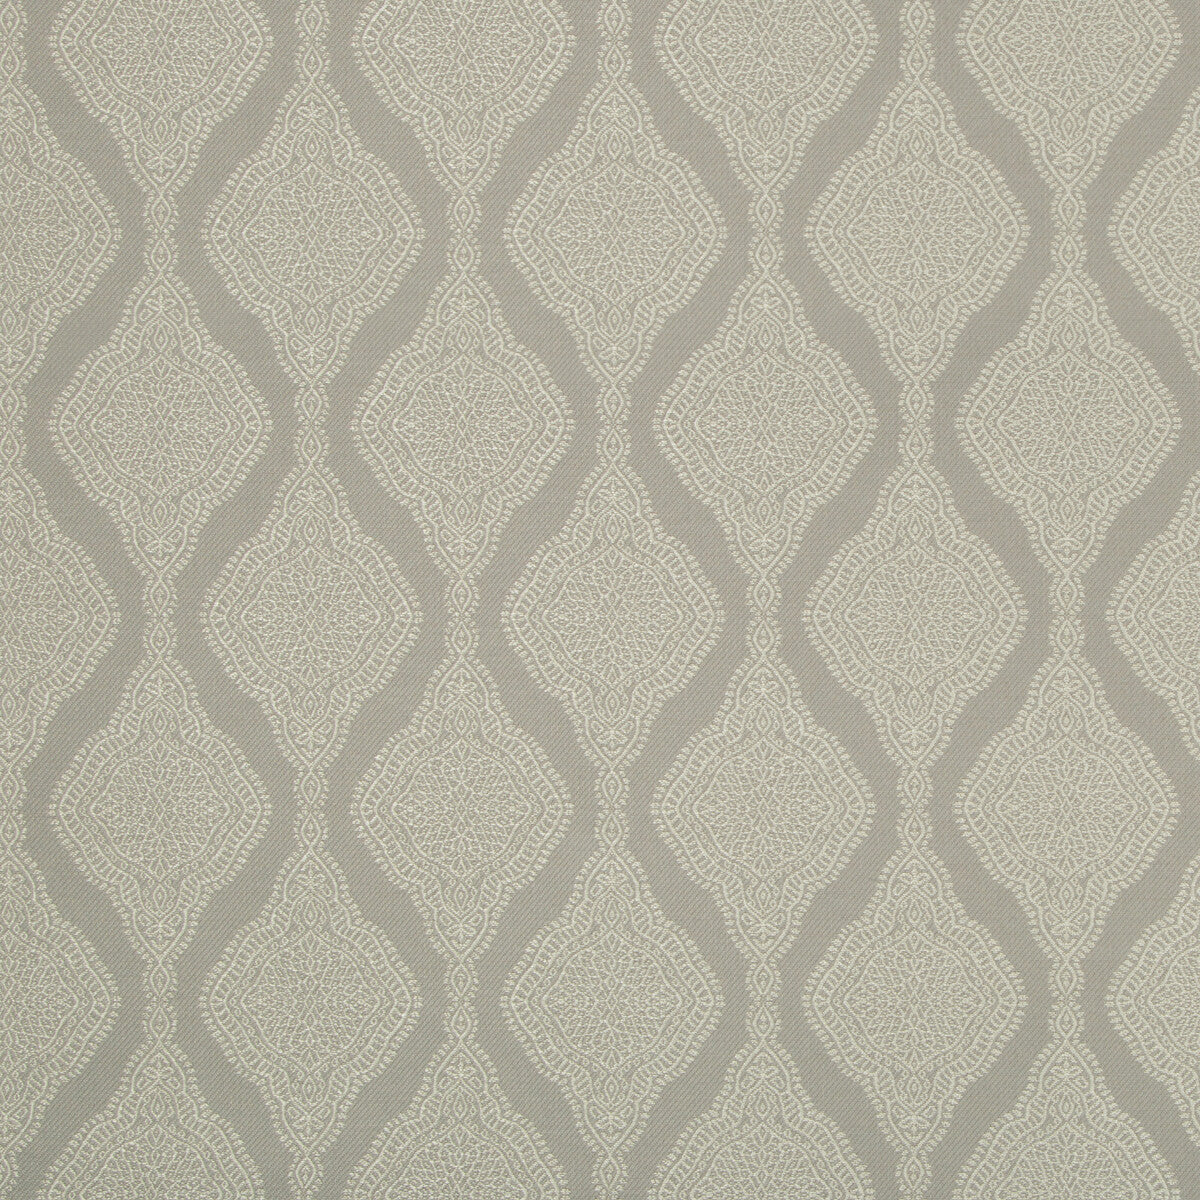 Liliana fabric in quartz color - pattern 32935.11.0 - by Kravet Contract in the Gis Crypton collection